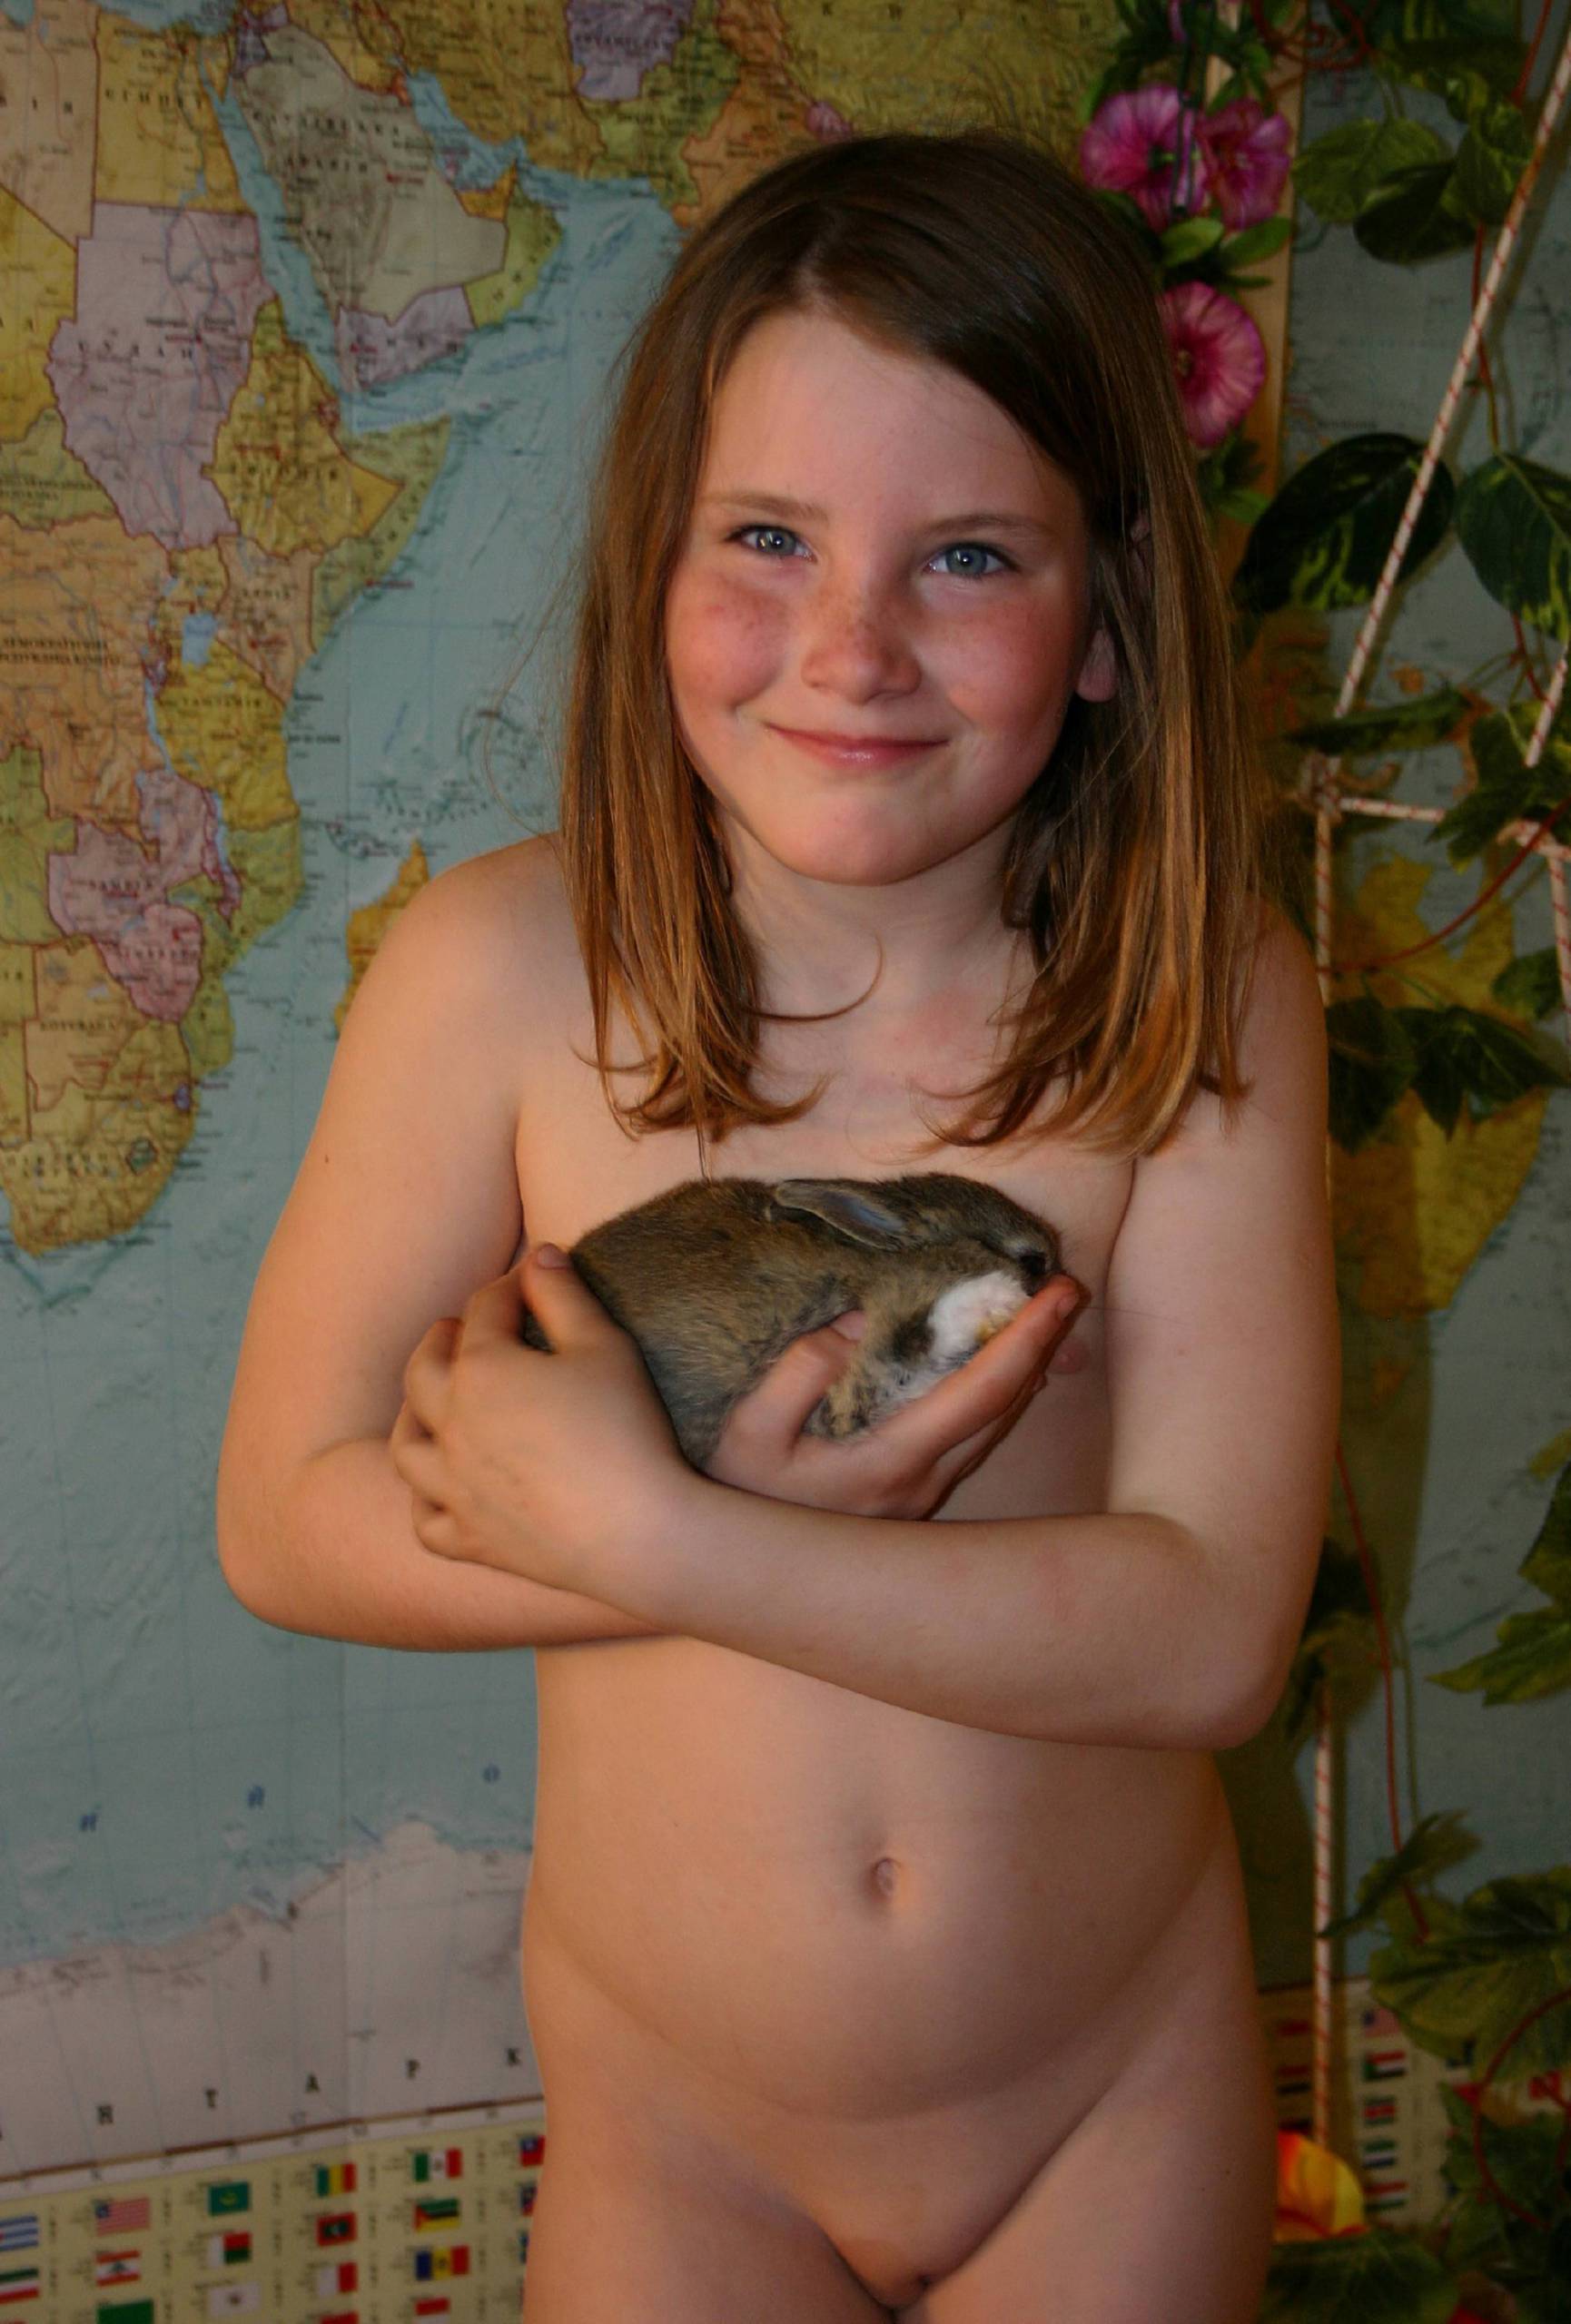 Pure Nudism Images Nudist Girl and the Bunny - 2